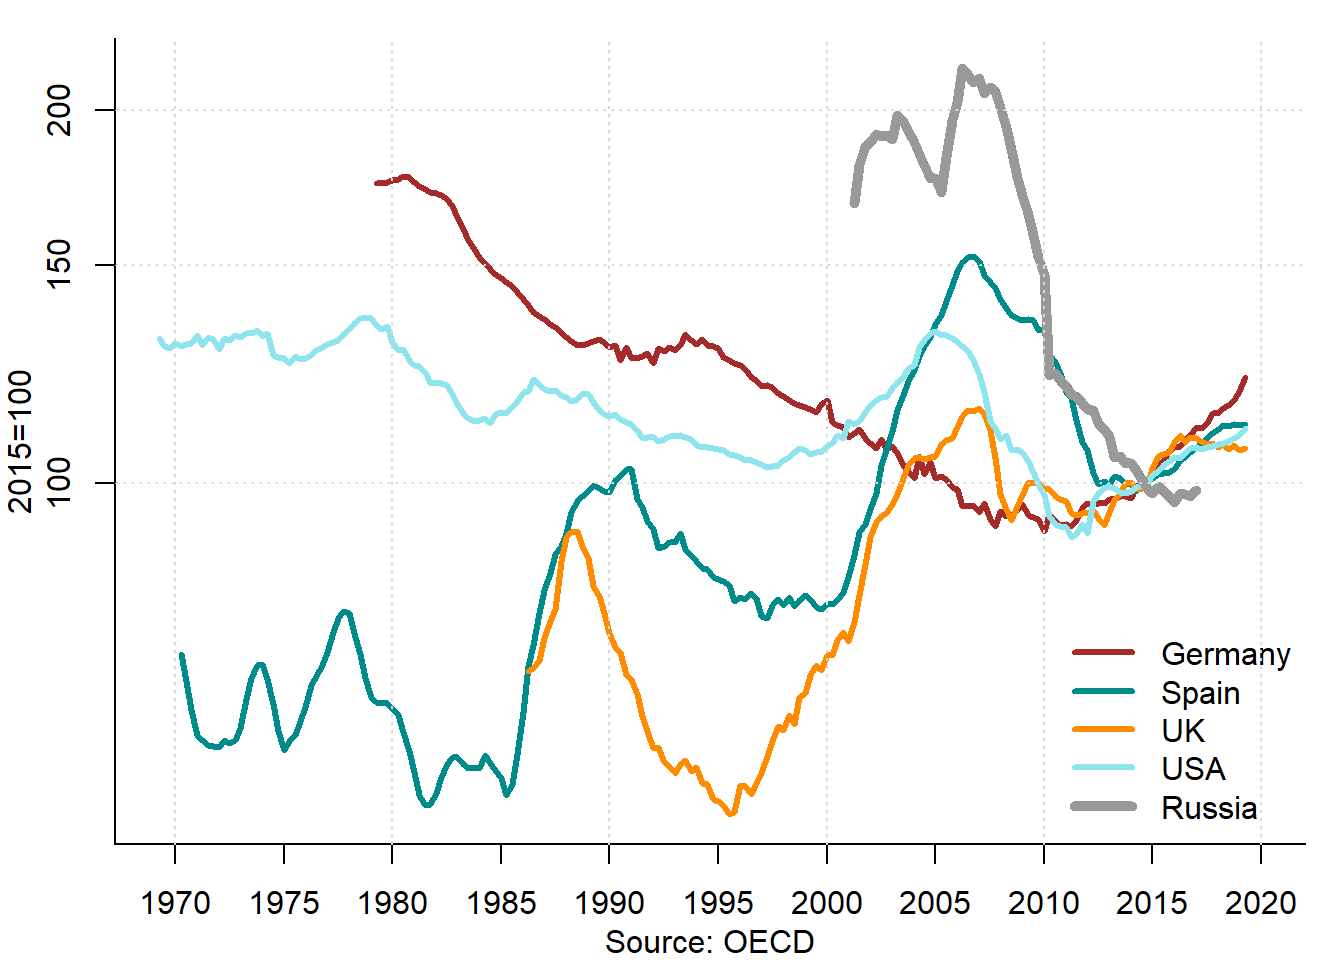 Price-to-income ratio in selected countries, 1970--2020